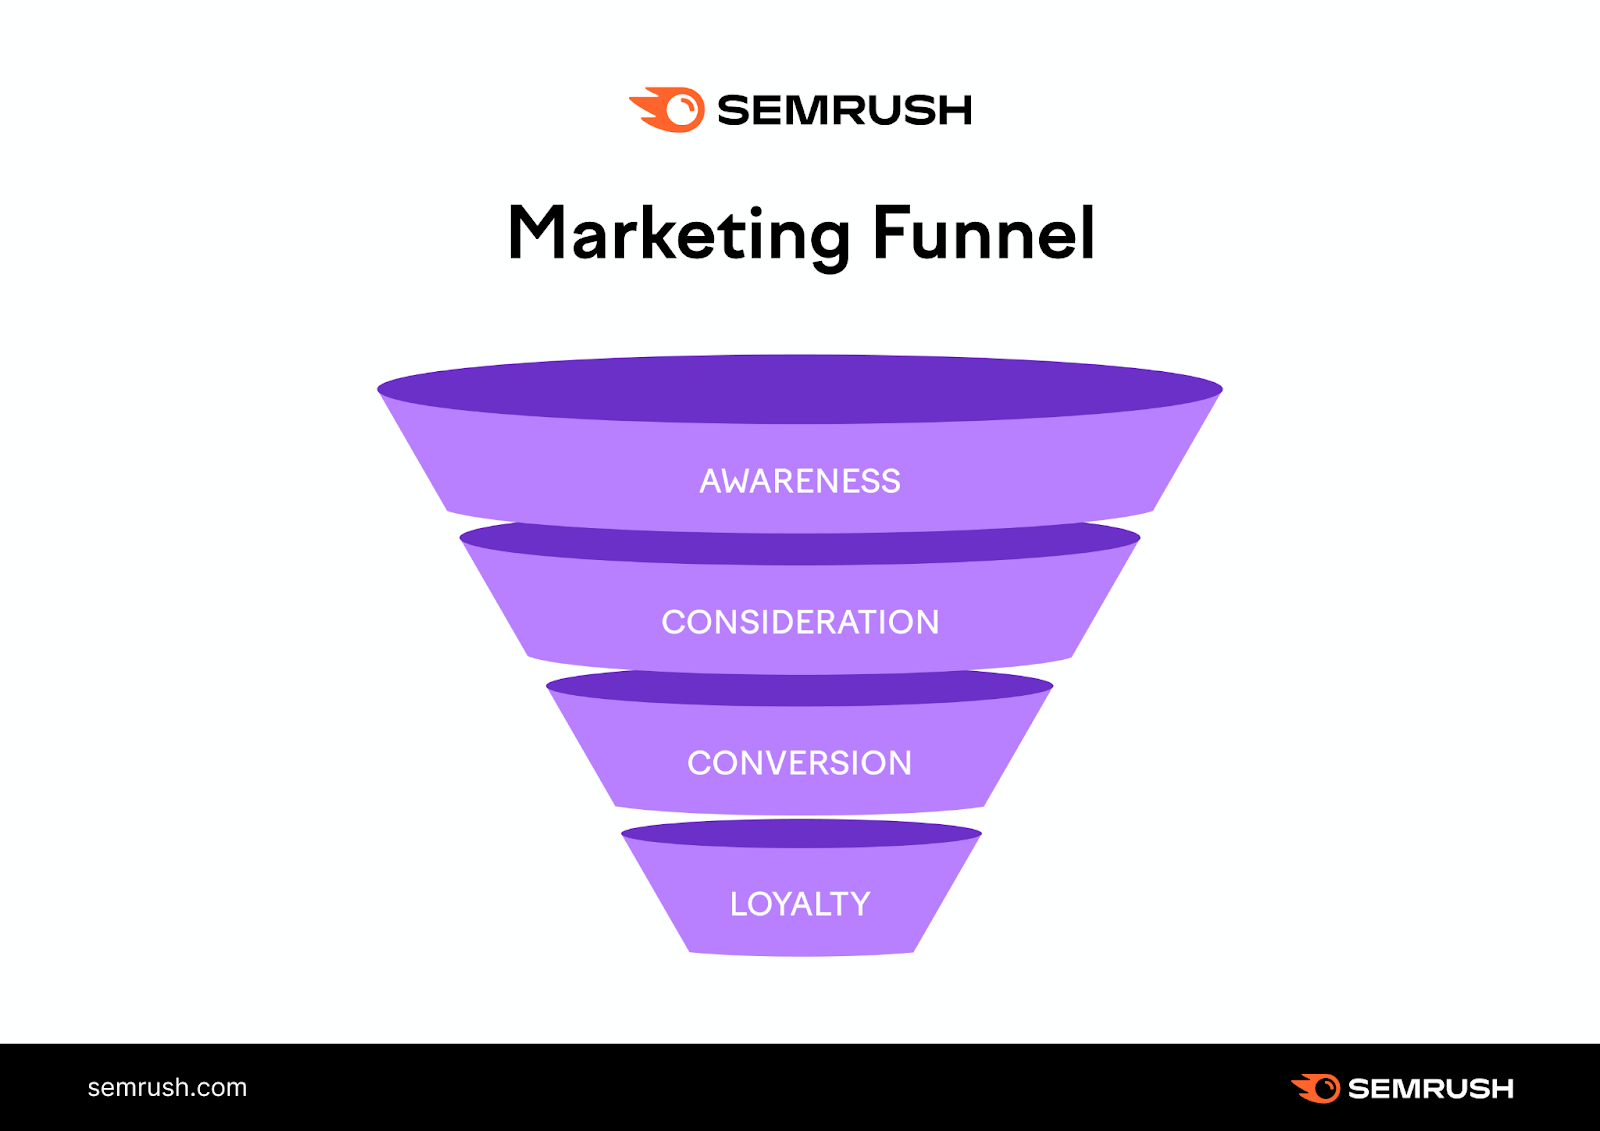 An infographic showing the marketing funnel, with "awareness," "consideration," "conversion," and "loyalty" stages